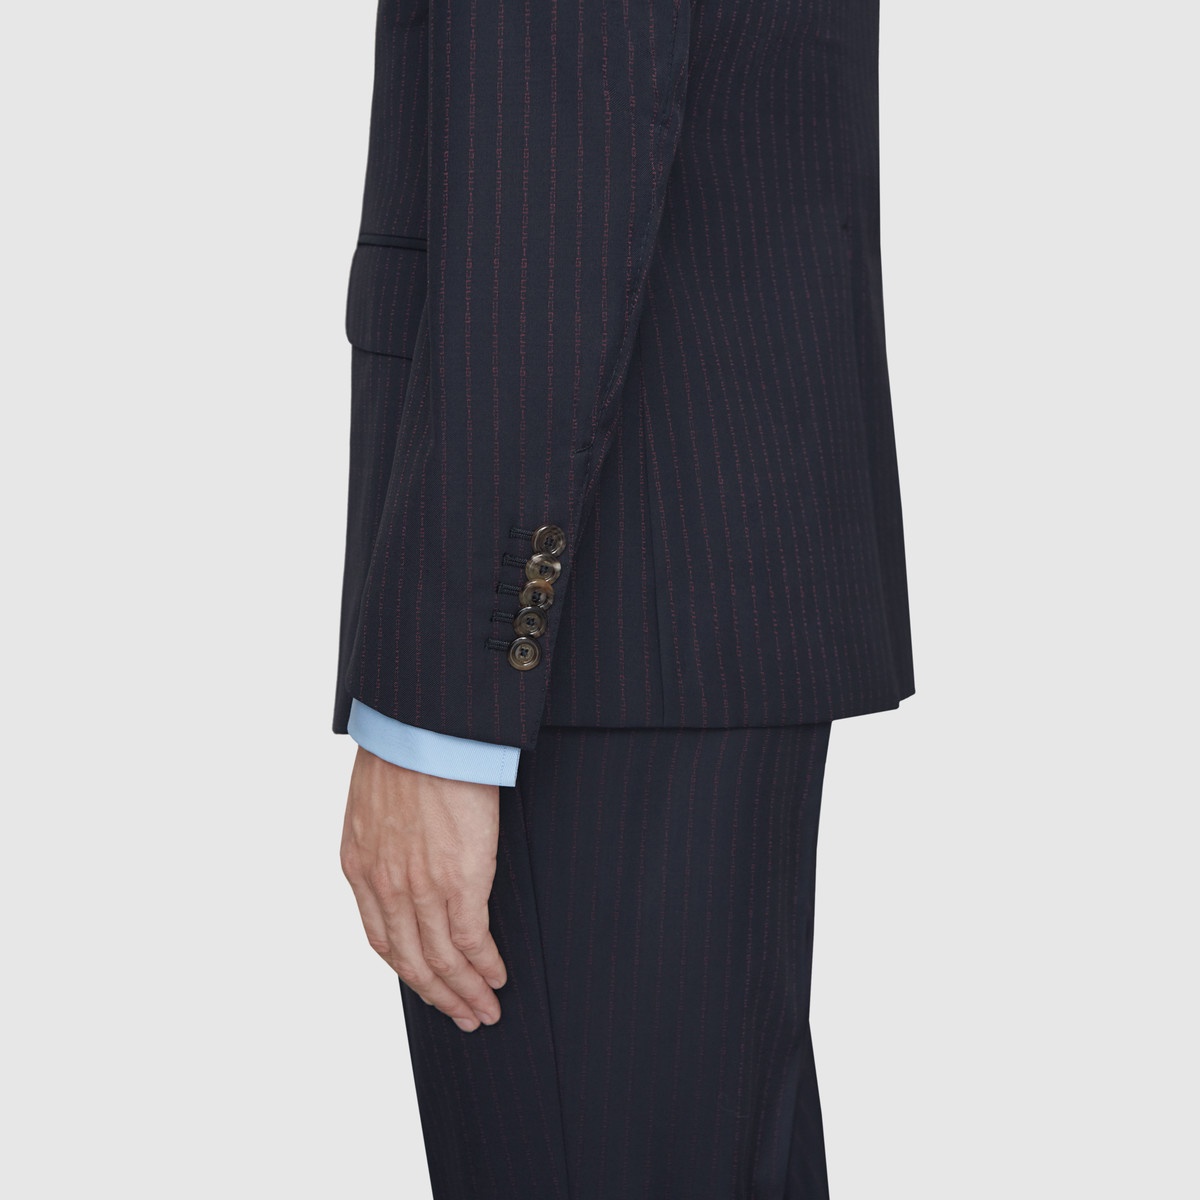 Fitted Gucci pinstripe suit - 10